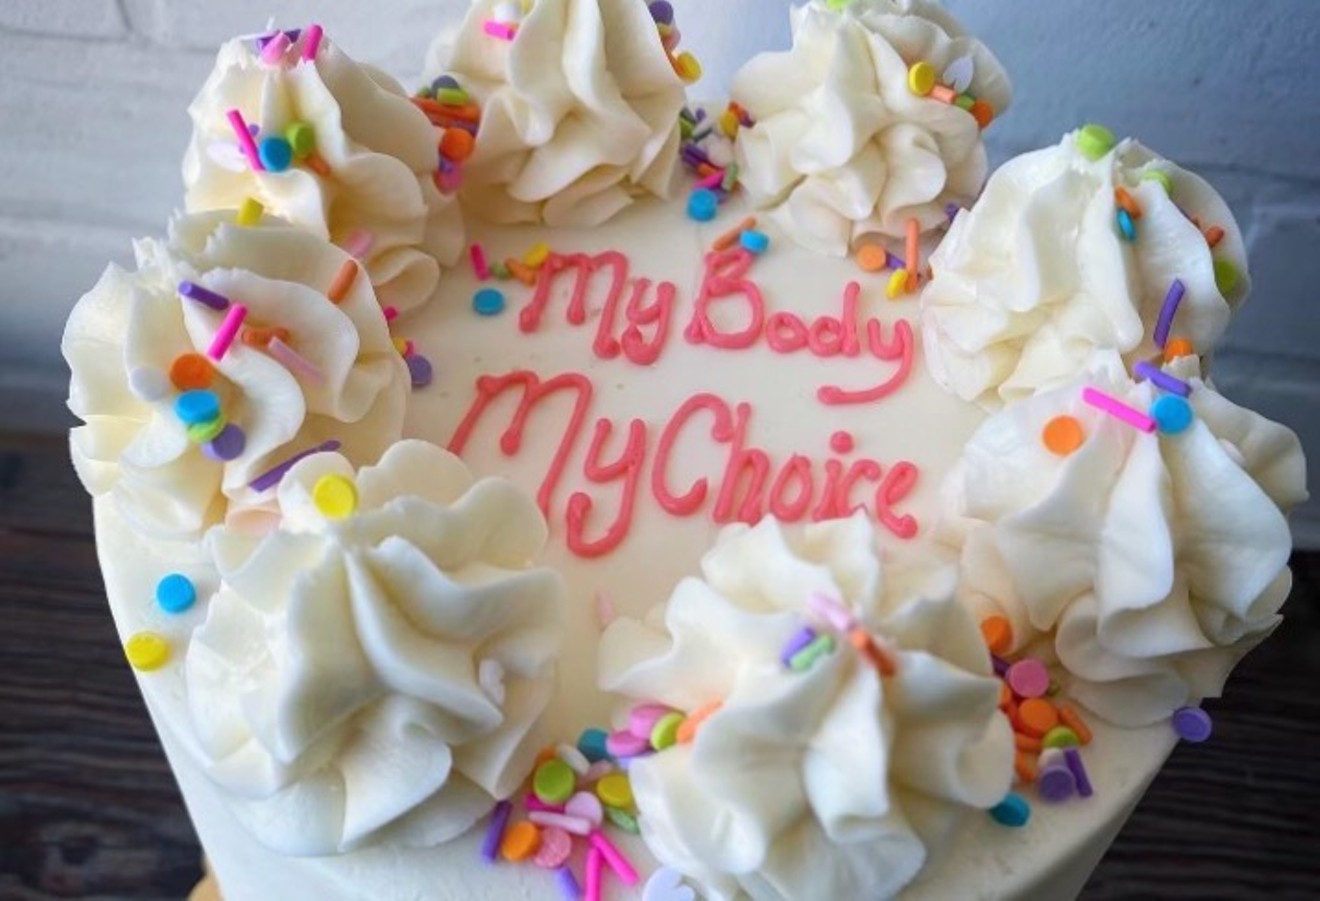 A photo of this cake on the Hive Bakery's Facebook page created a slew of positive and negative feedback.